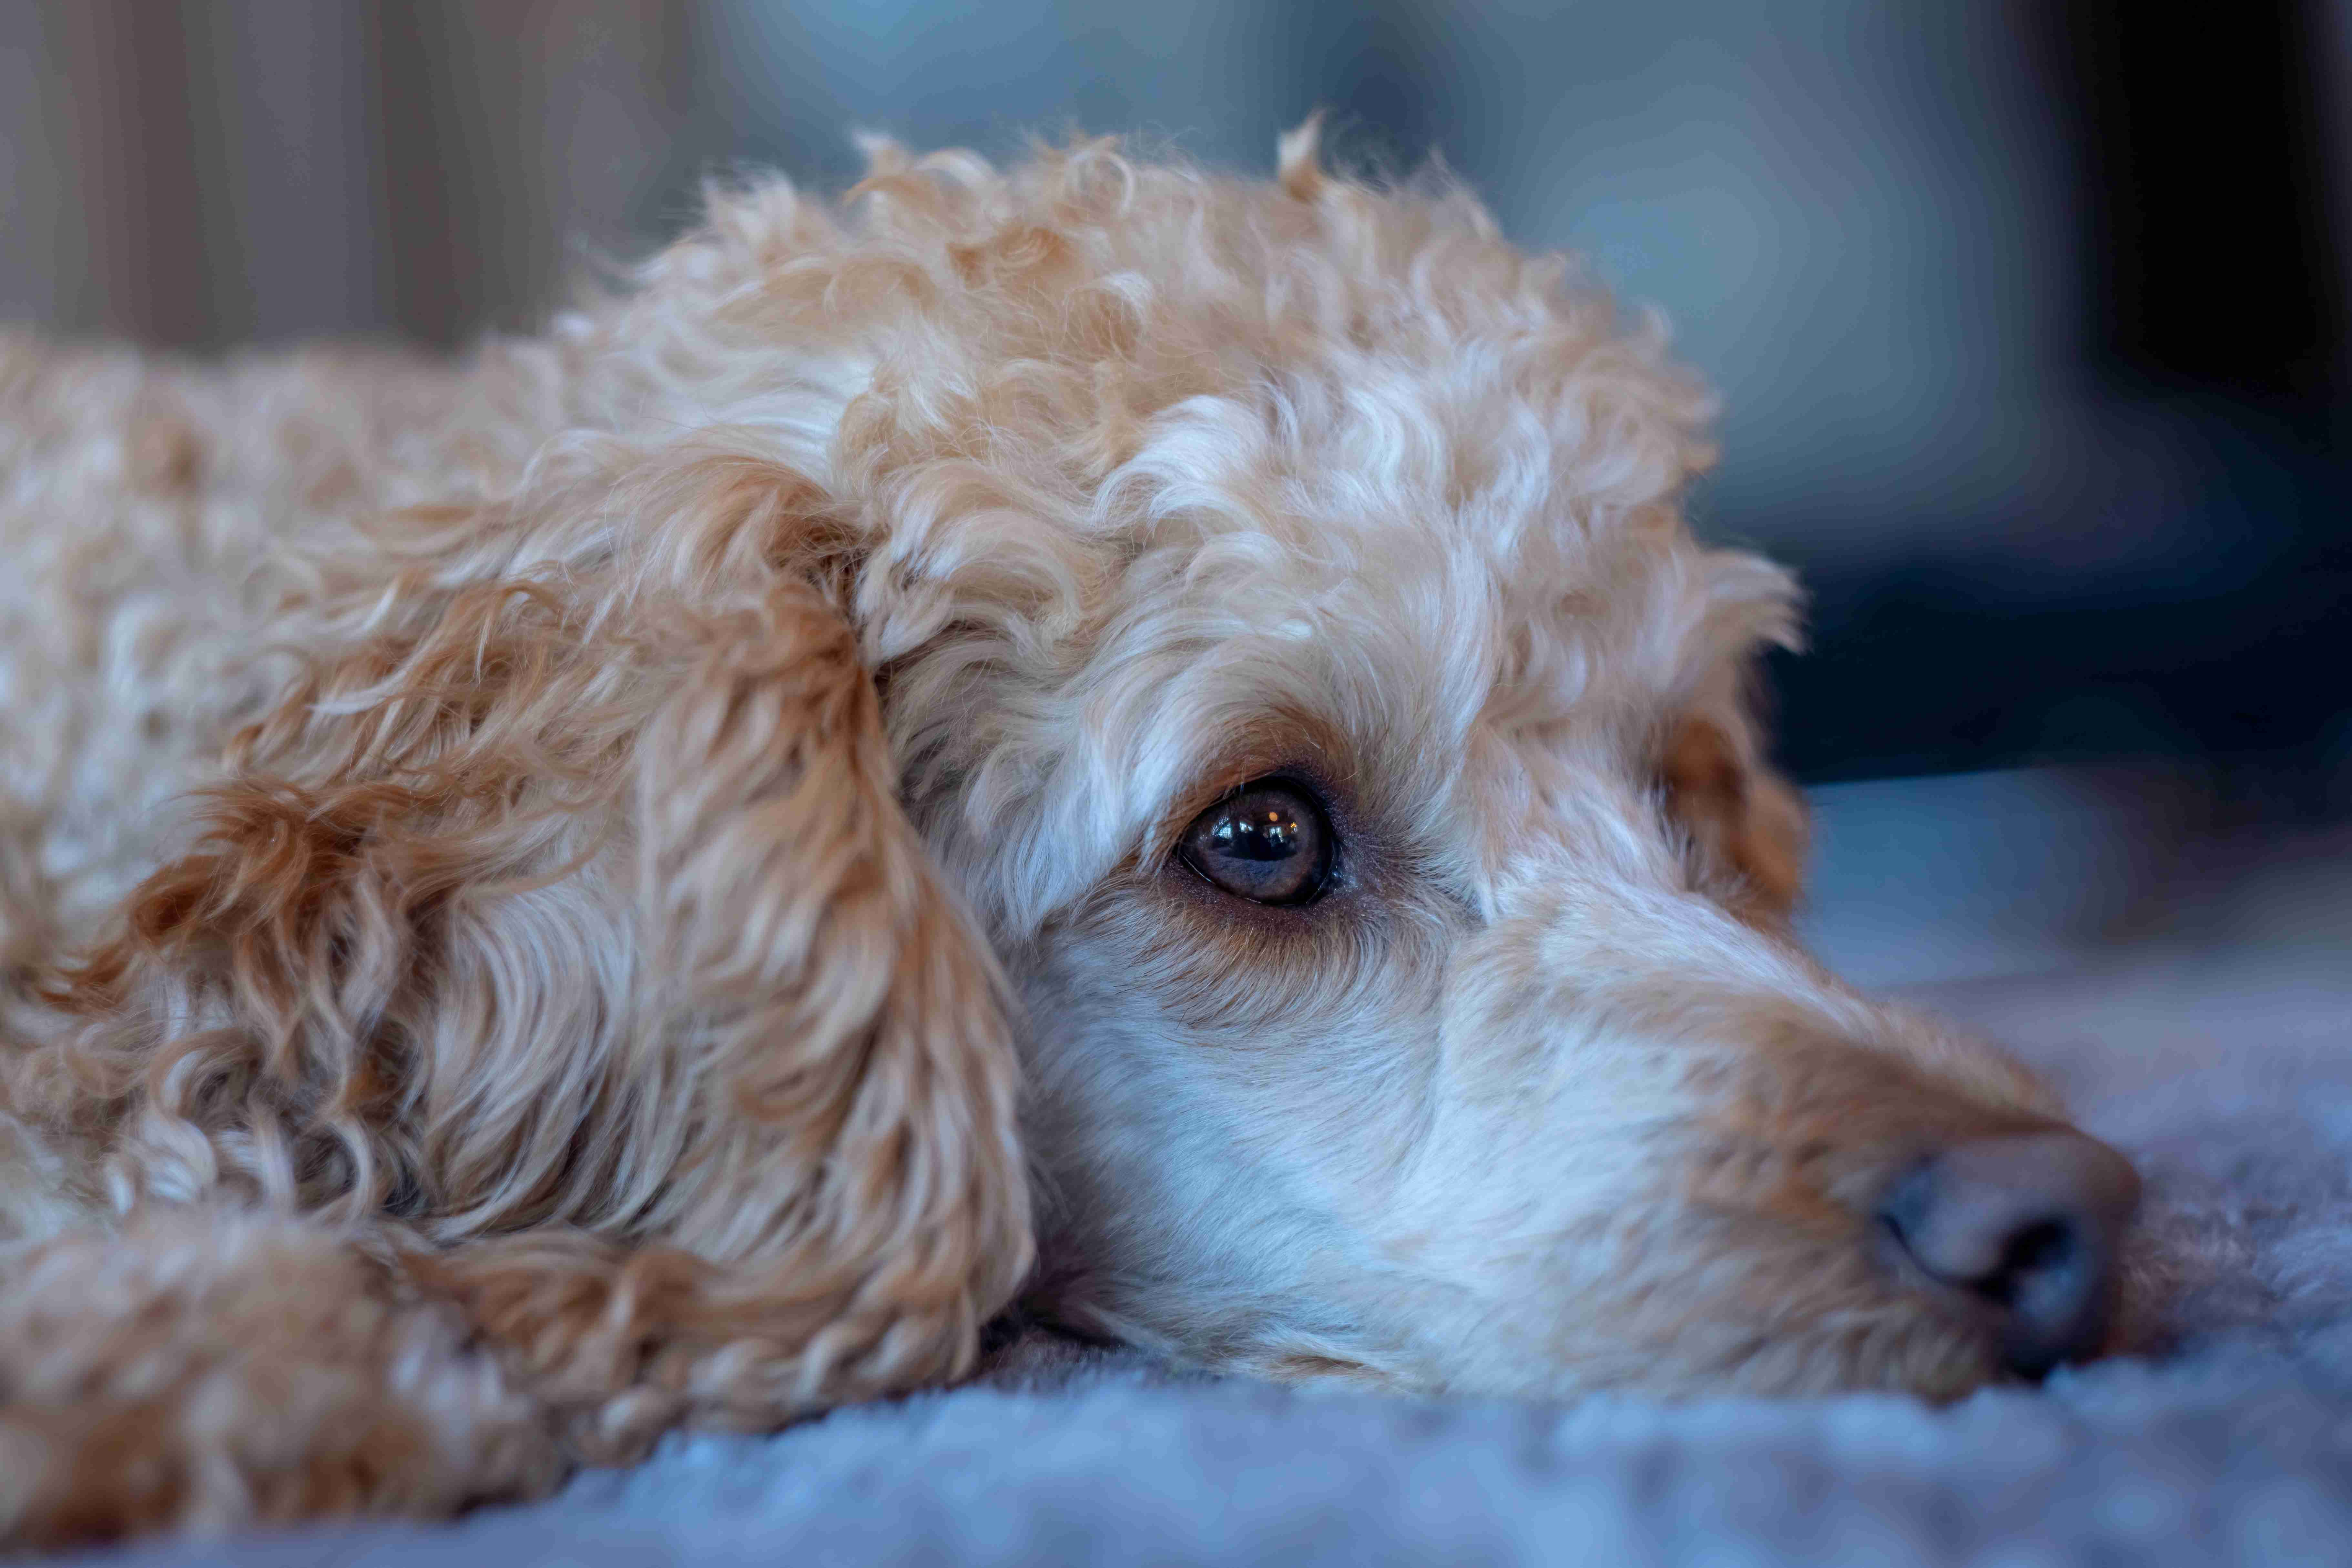 Are Poodles at risk of developing urinary stones or crystals? What treatment options are available for these conditions?